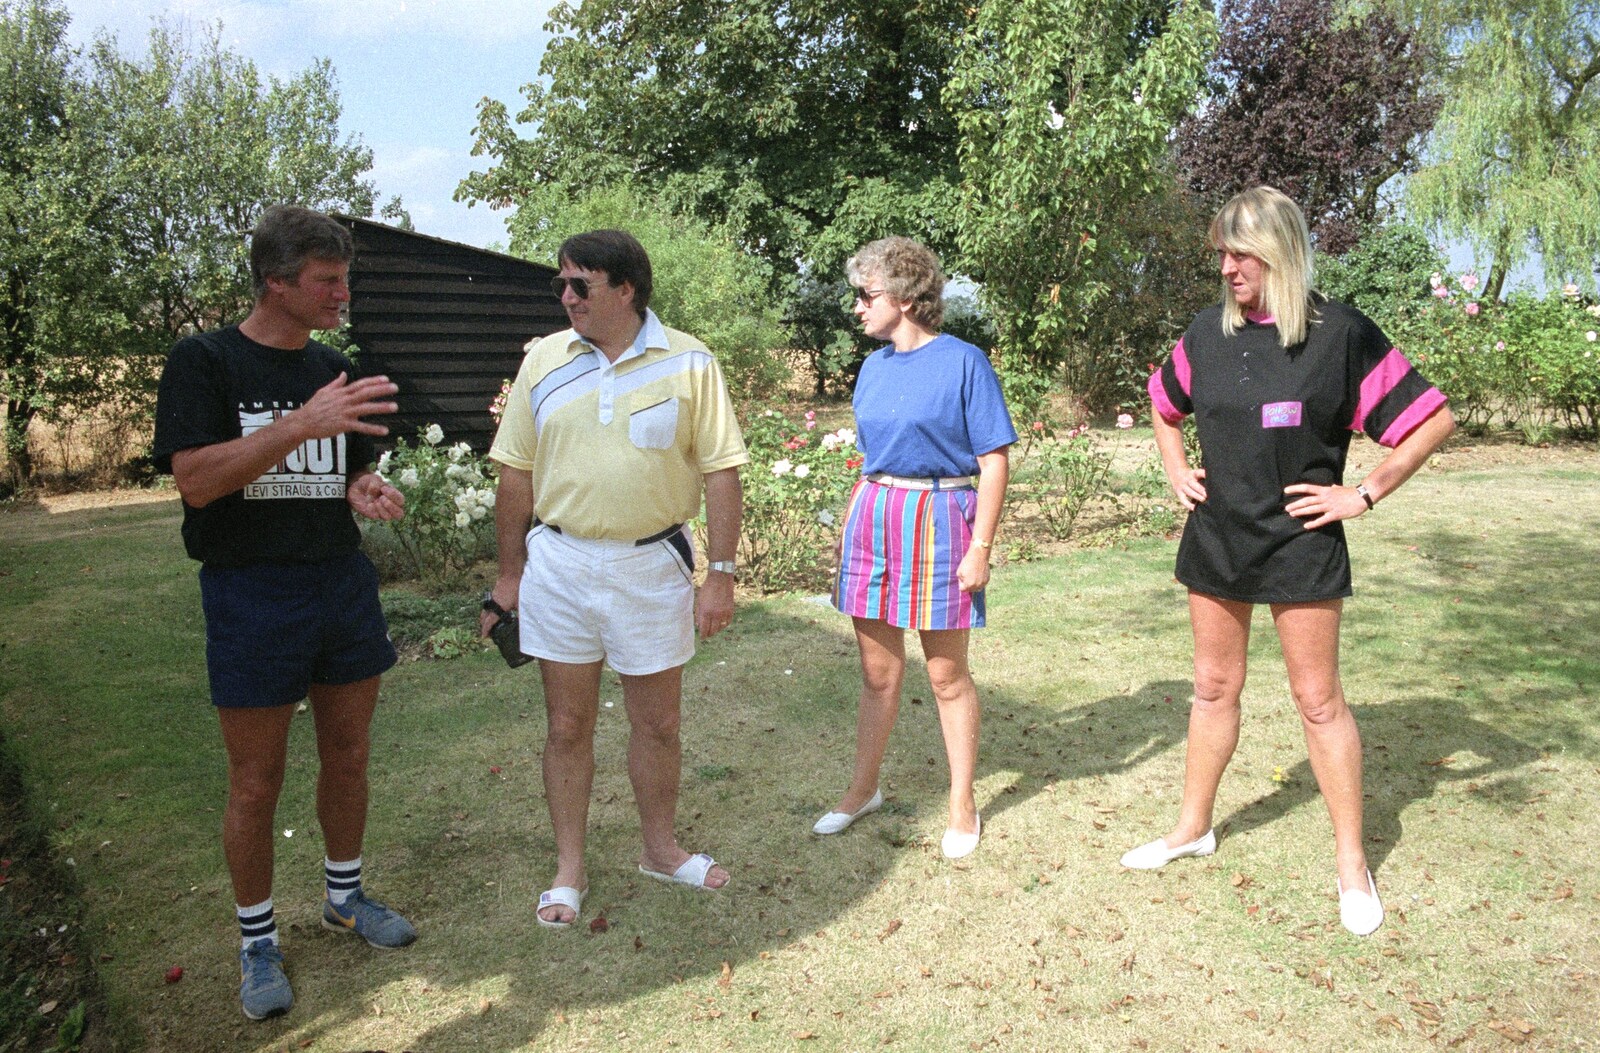 Sue's Fire Dance, Stuston, Suffolk - 21st July 1990: Geoff, Corky, Linda and Sue chat in the garden